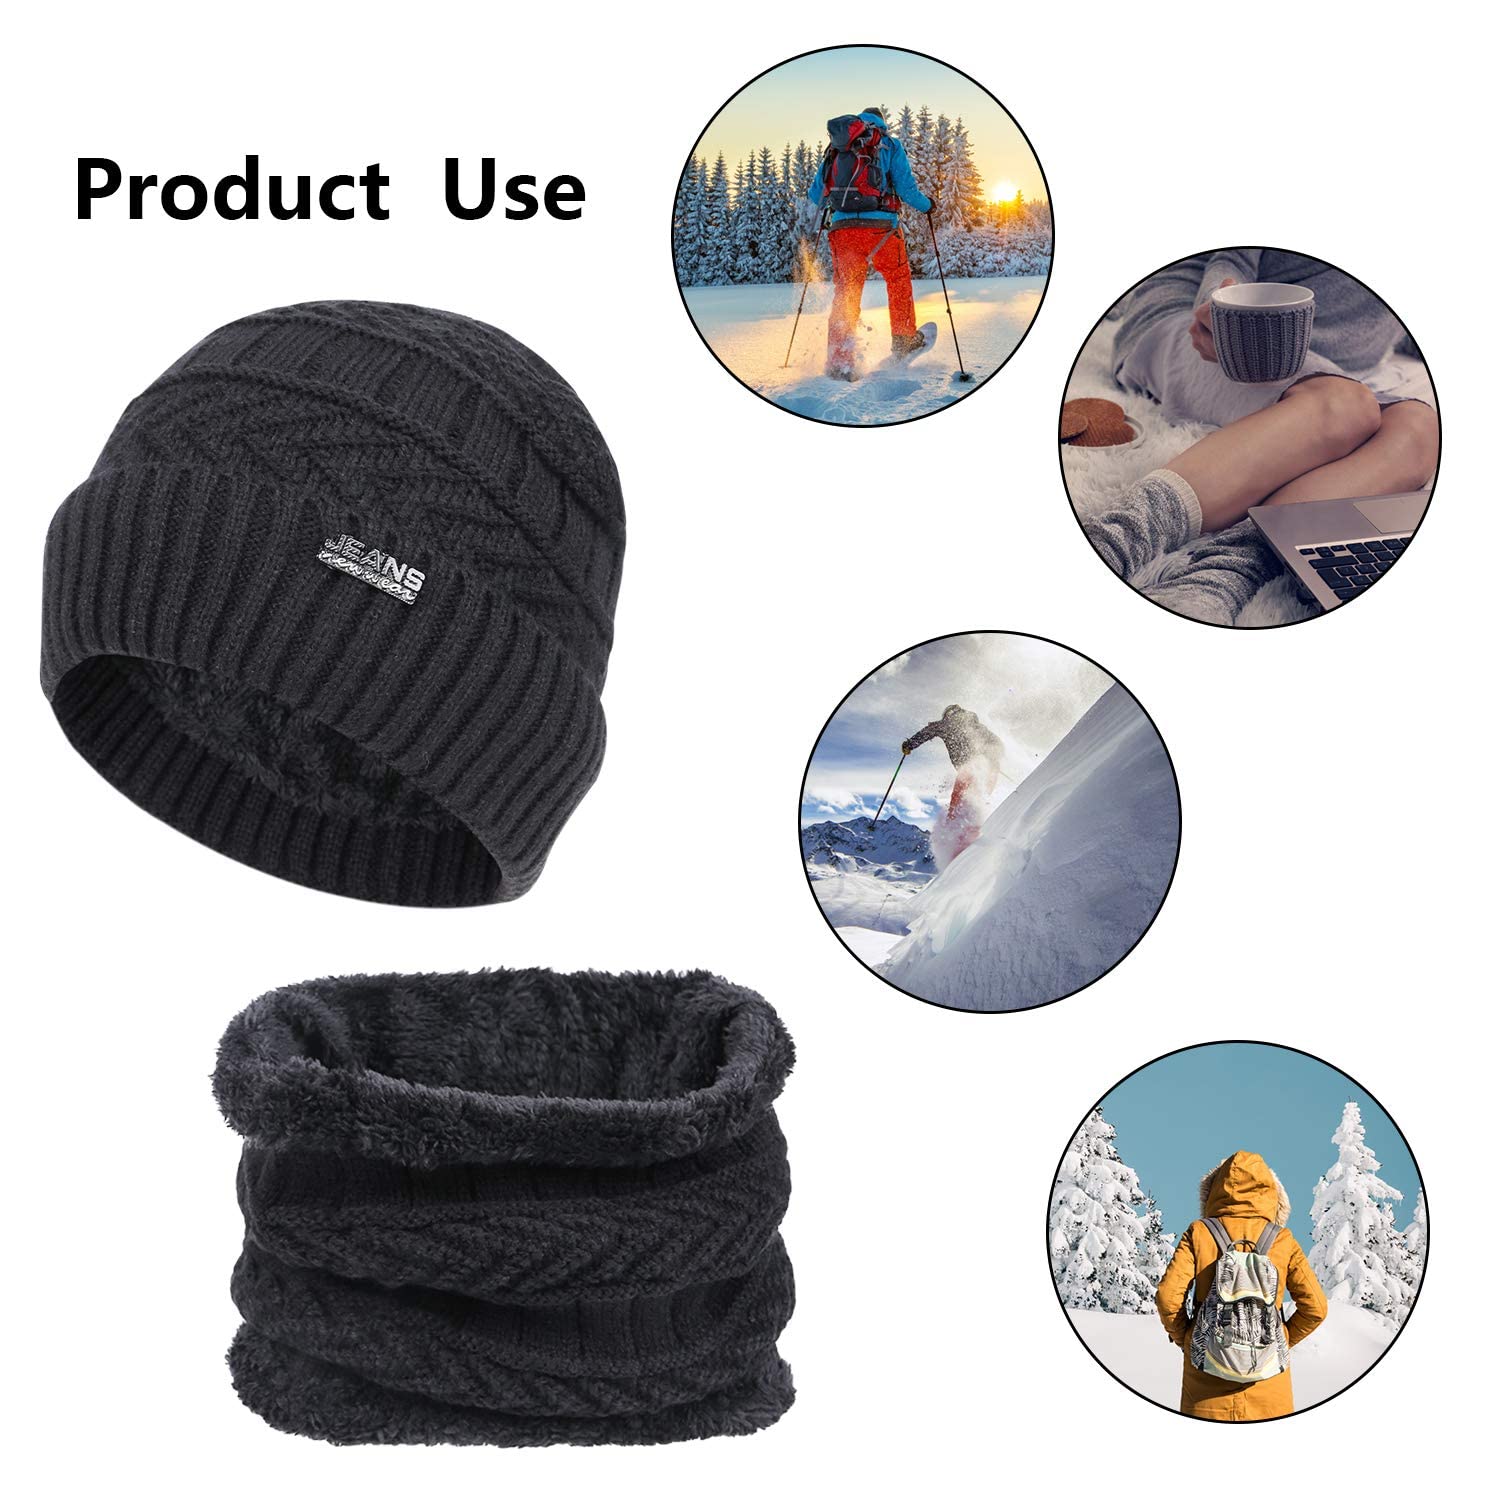 3-Pieces Winter Beanie Hats, Scarf and Touch Screen Gloves Set for Men and Women, Warm Knit Cap Set Black